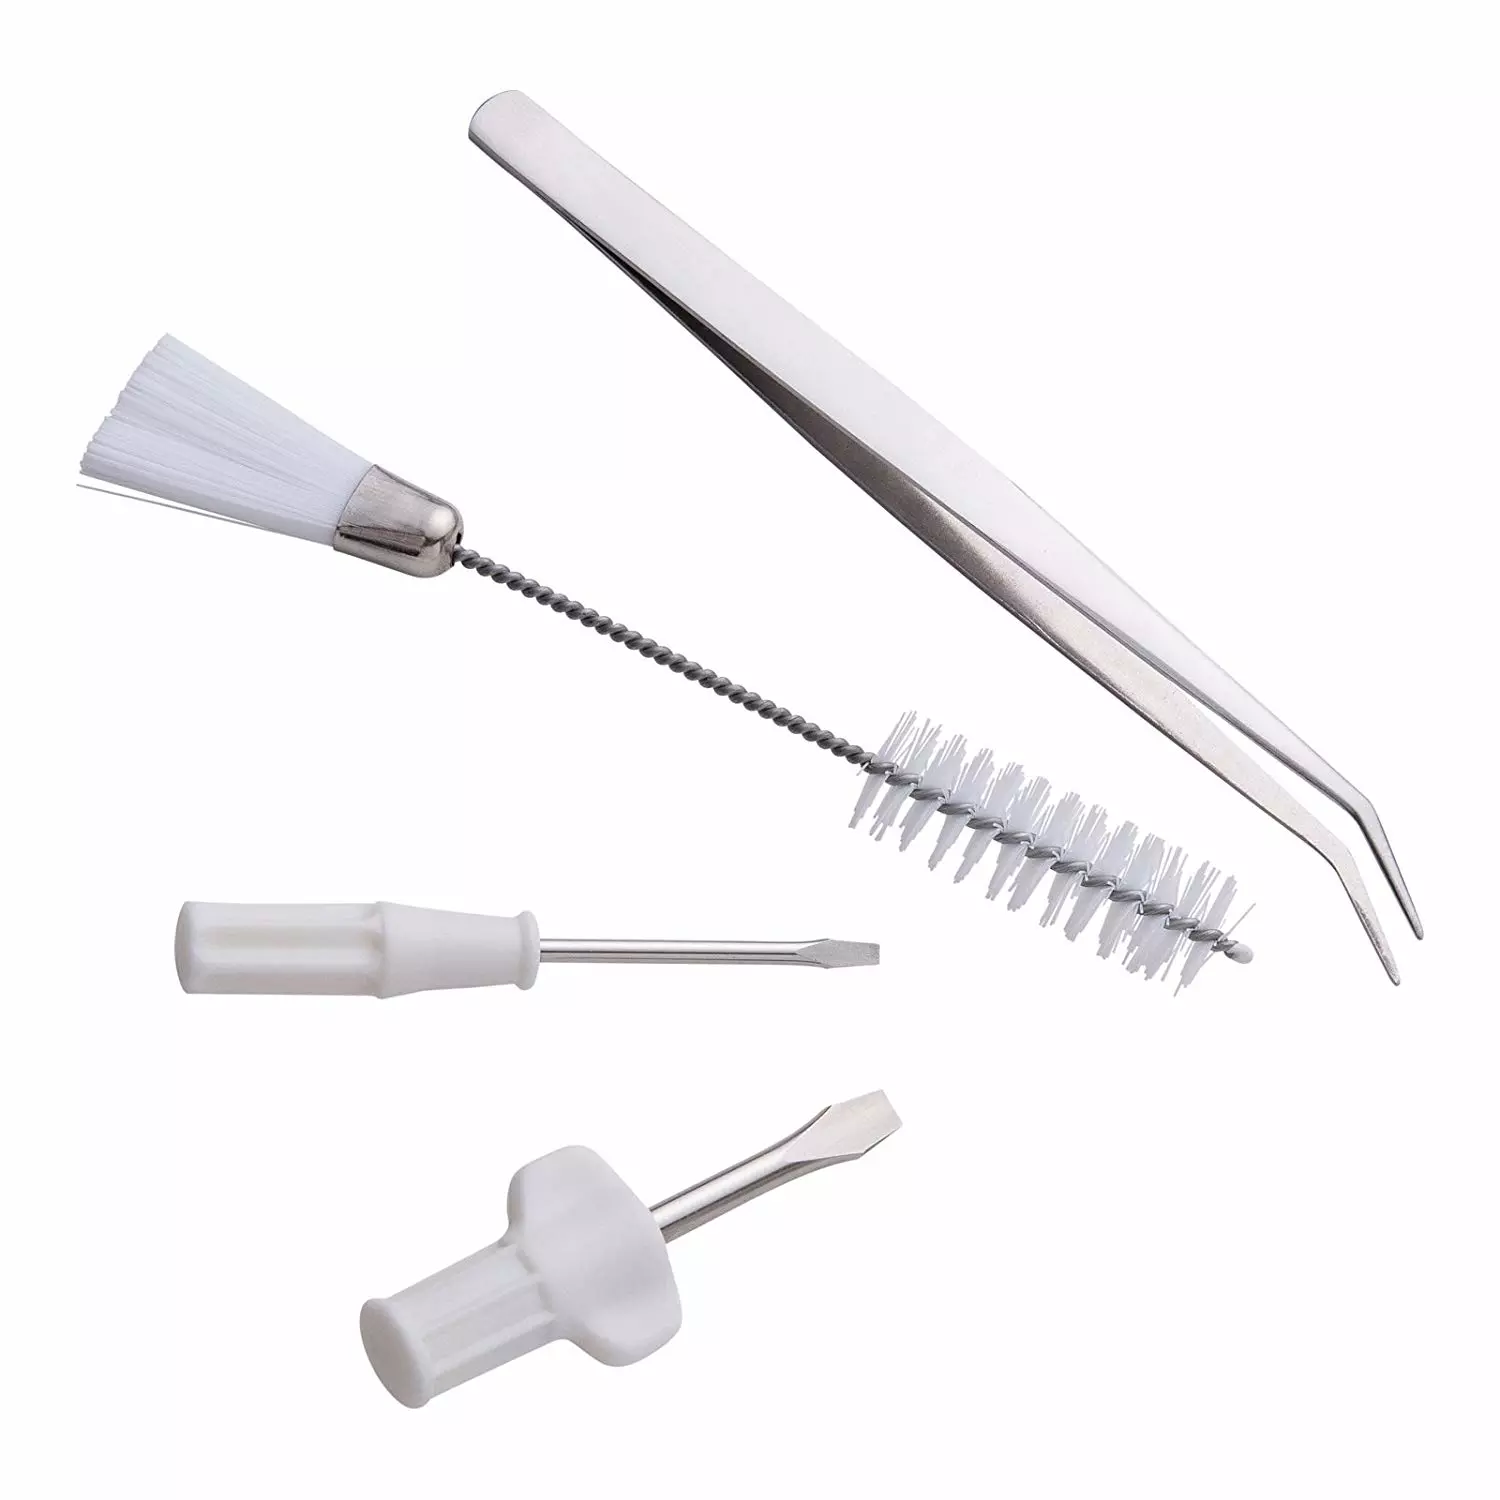 Overlock and Serger Service Kit 2PCS Different Size Screwdrivers 1PC Tweezer and 1PC Lint Brush for Sewing Machine CHENJIN Sewing Machine 